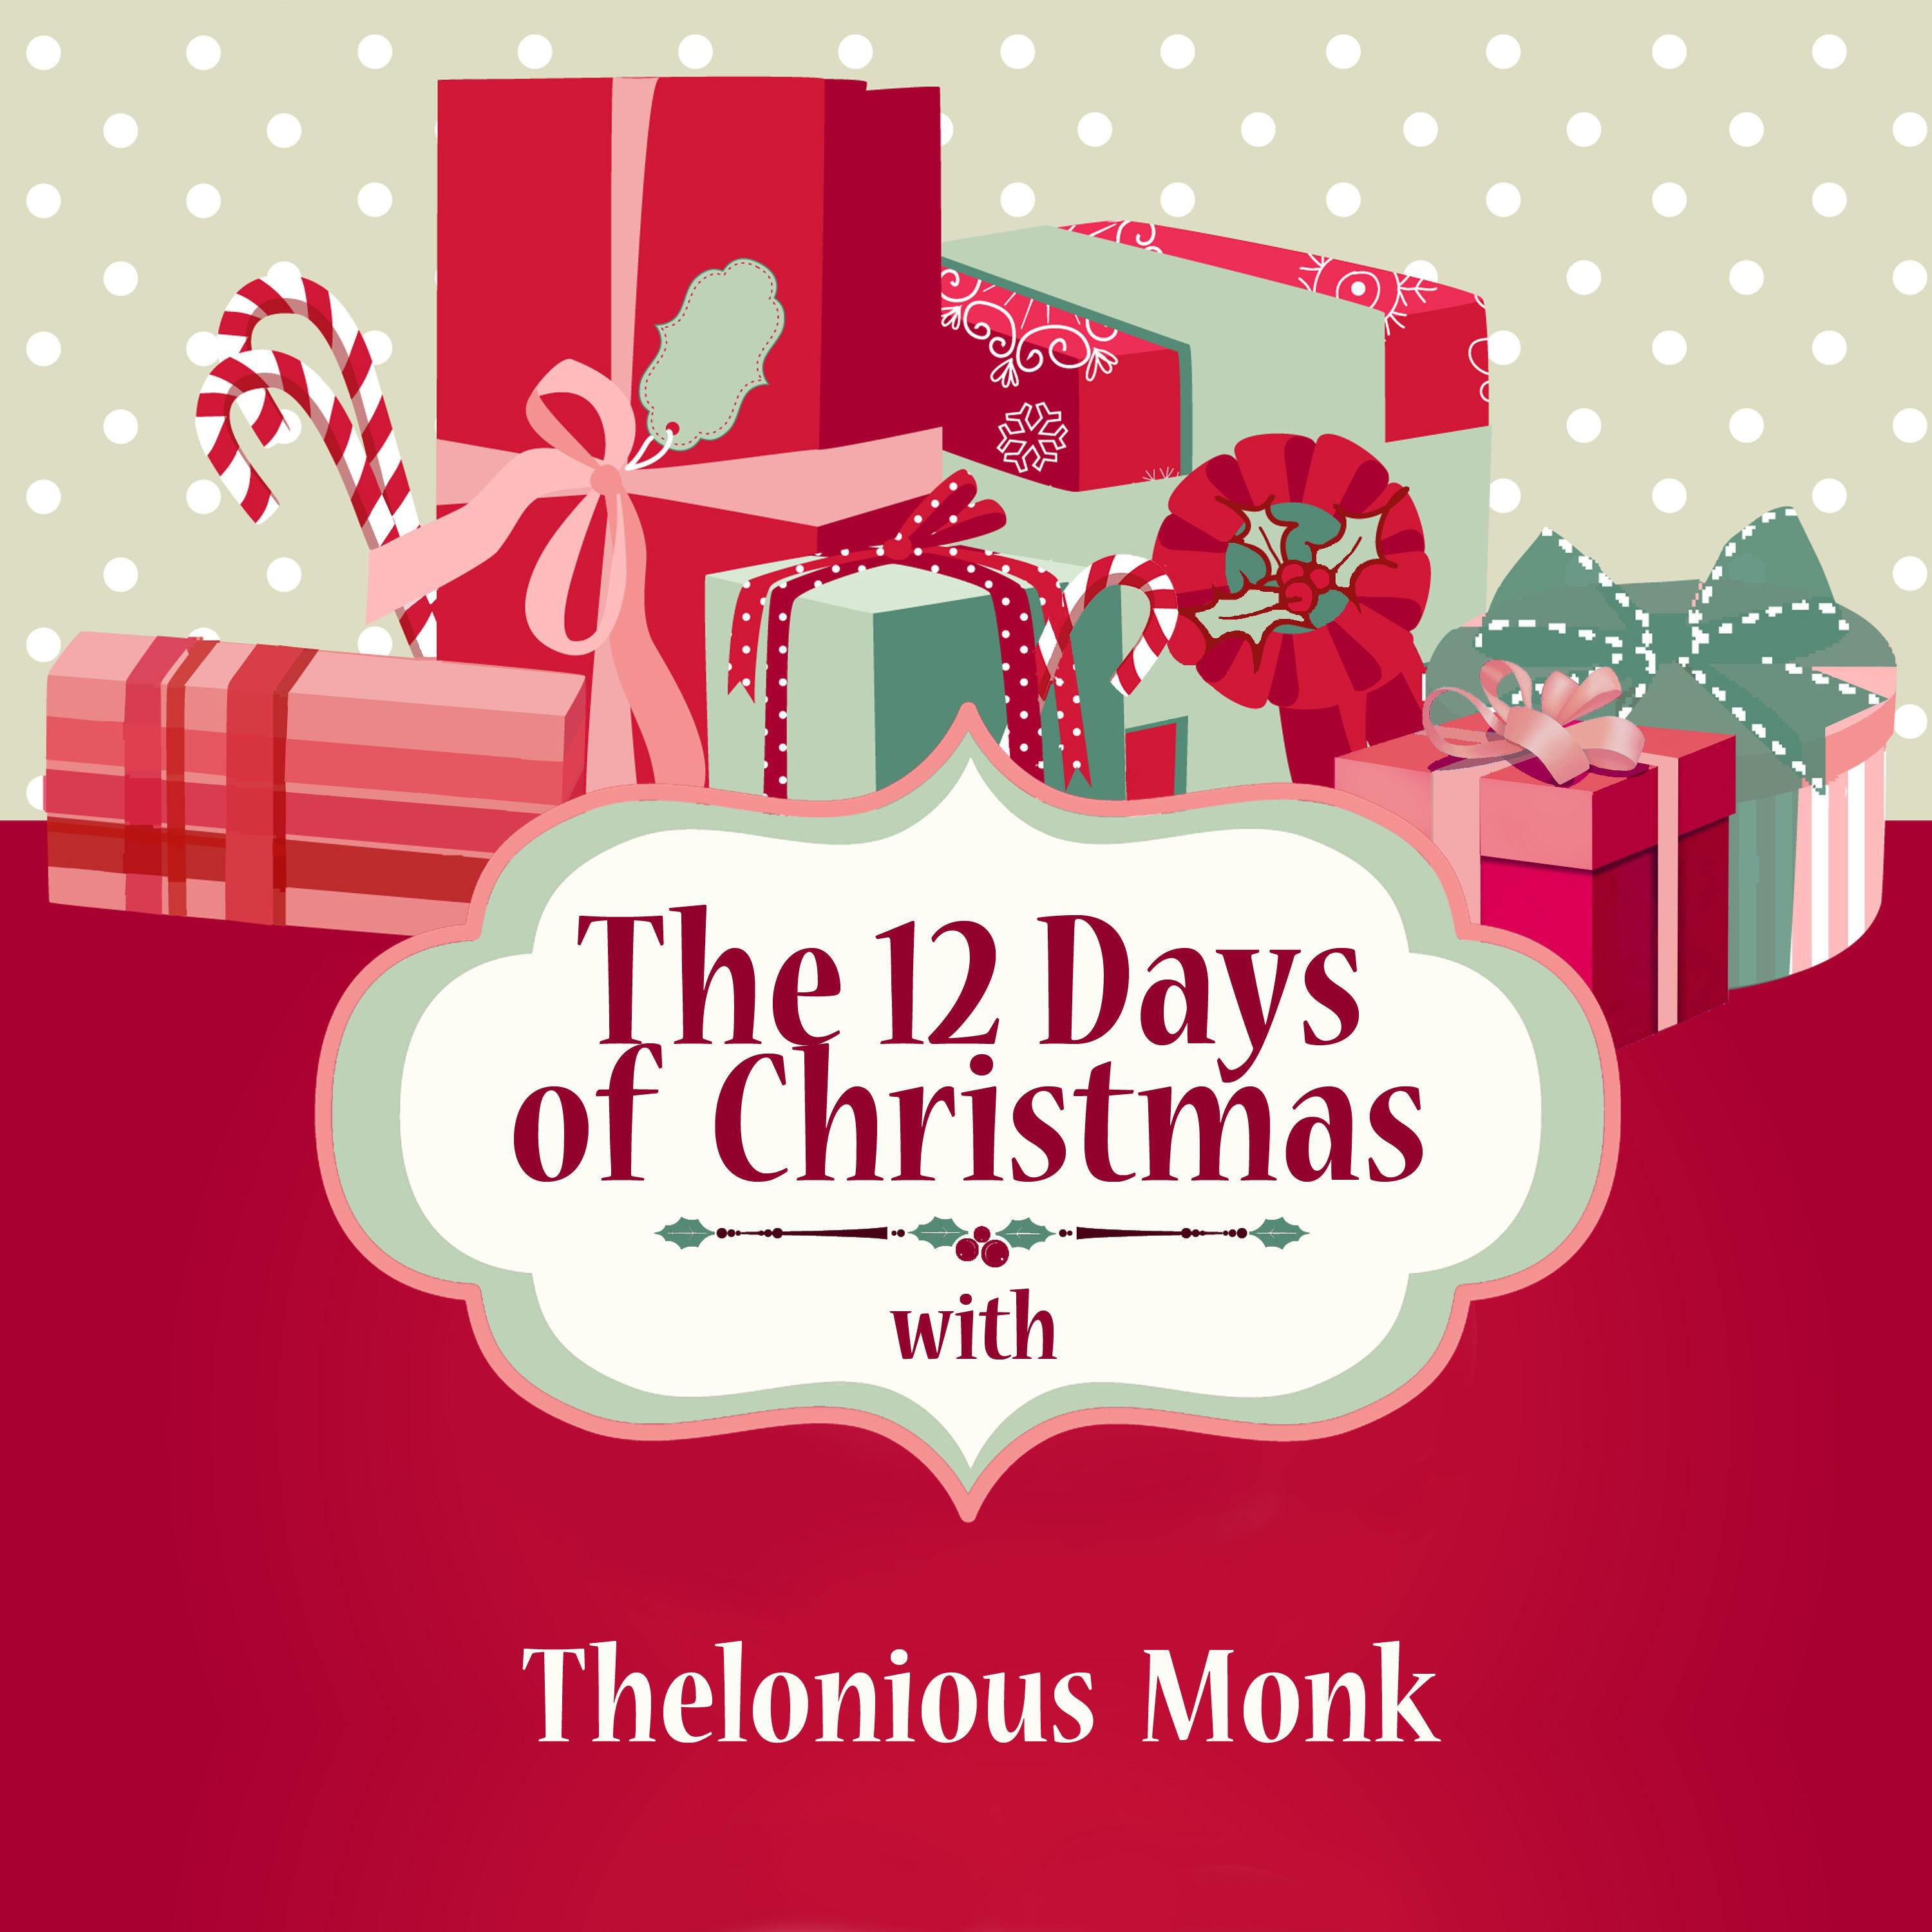 The 12 Days of Christmas with Thelonious Monk